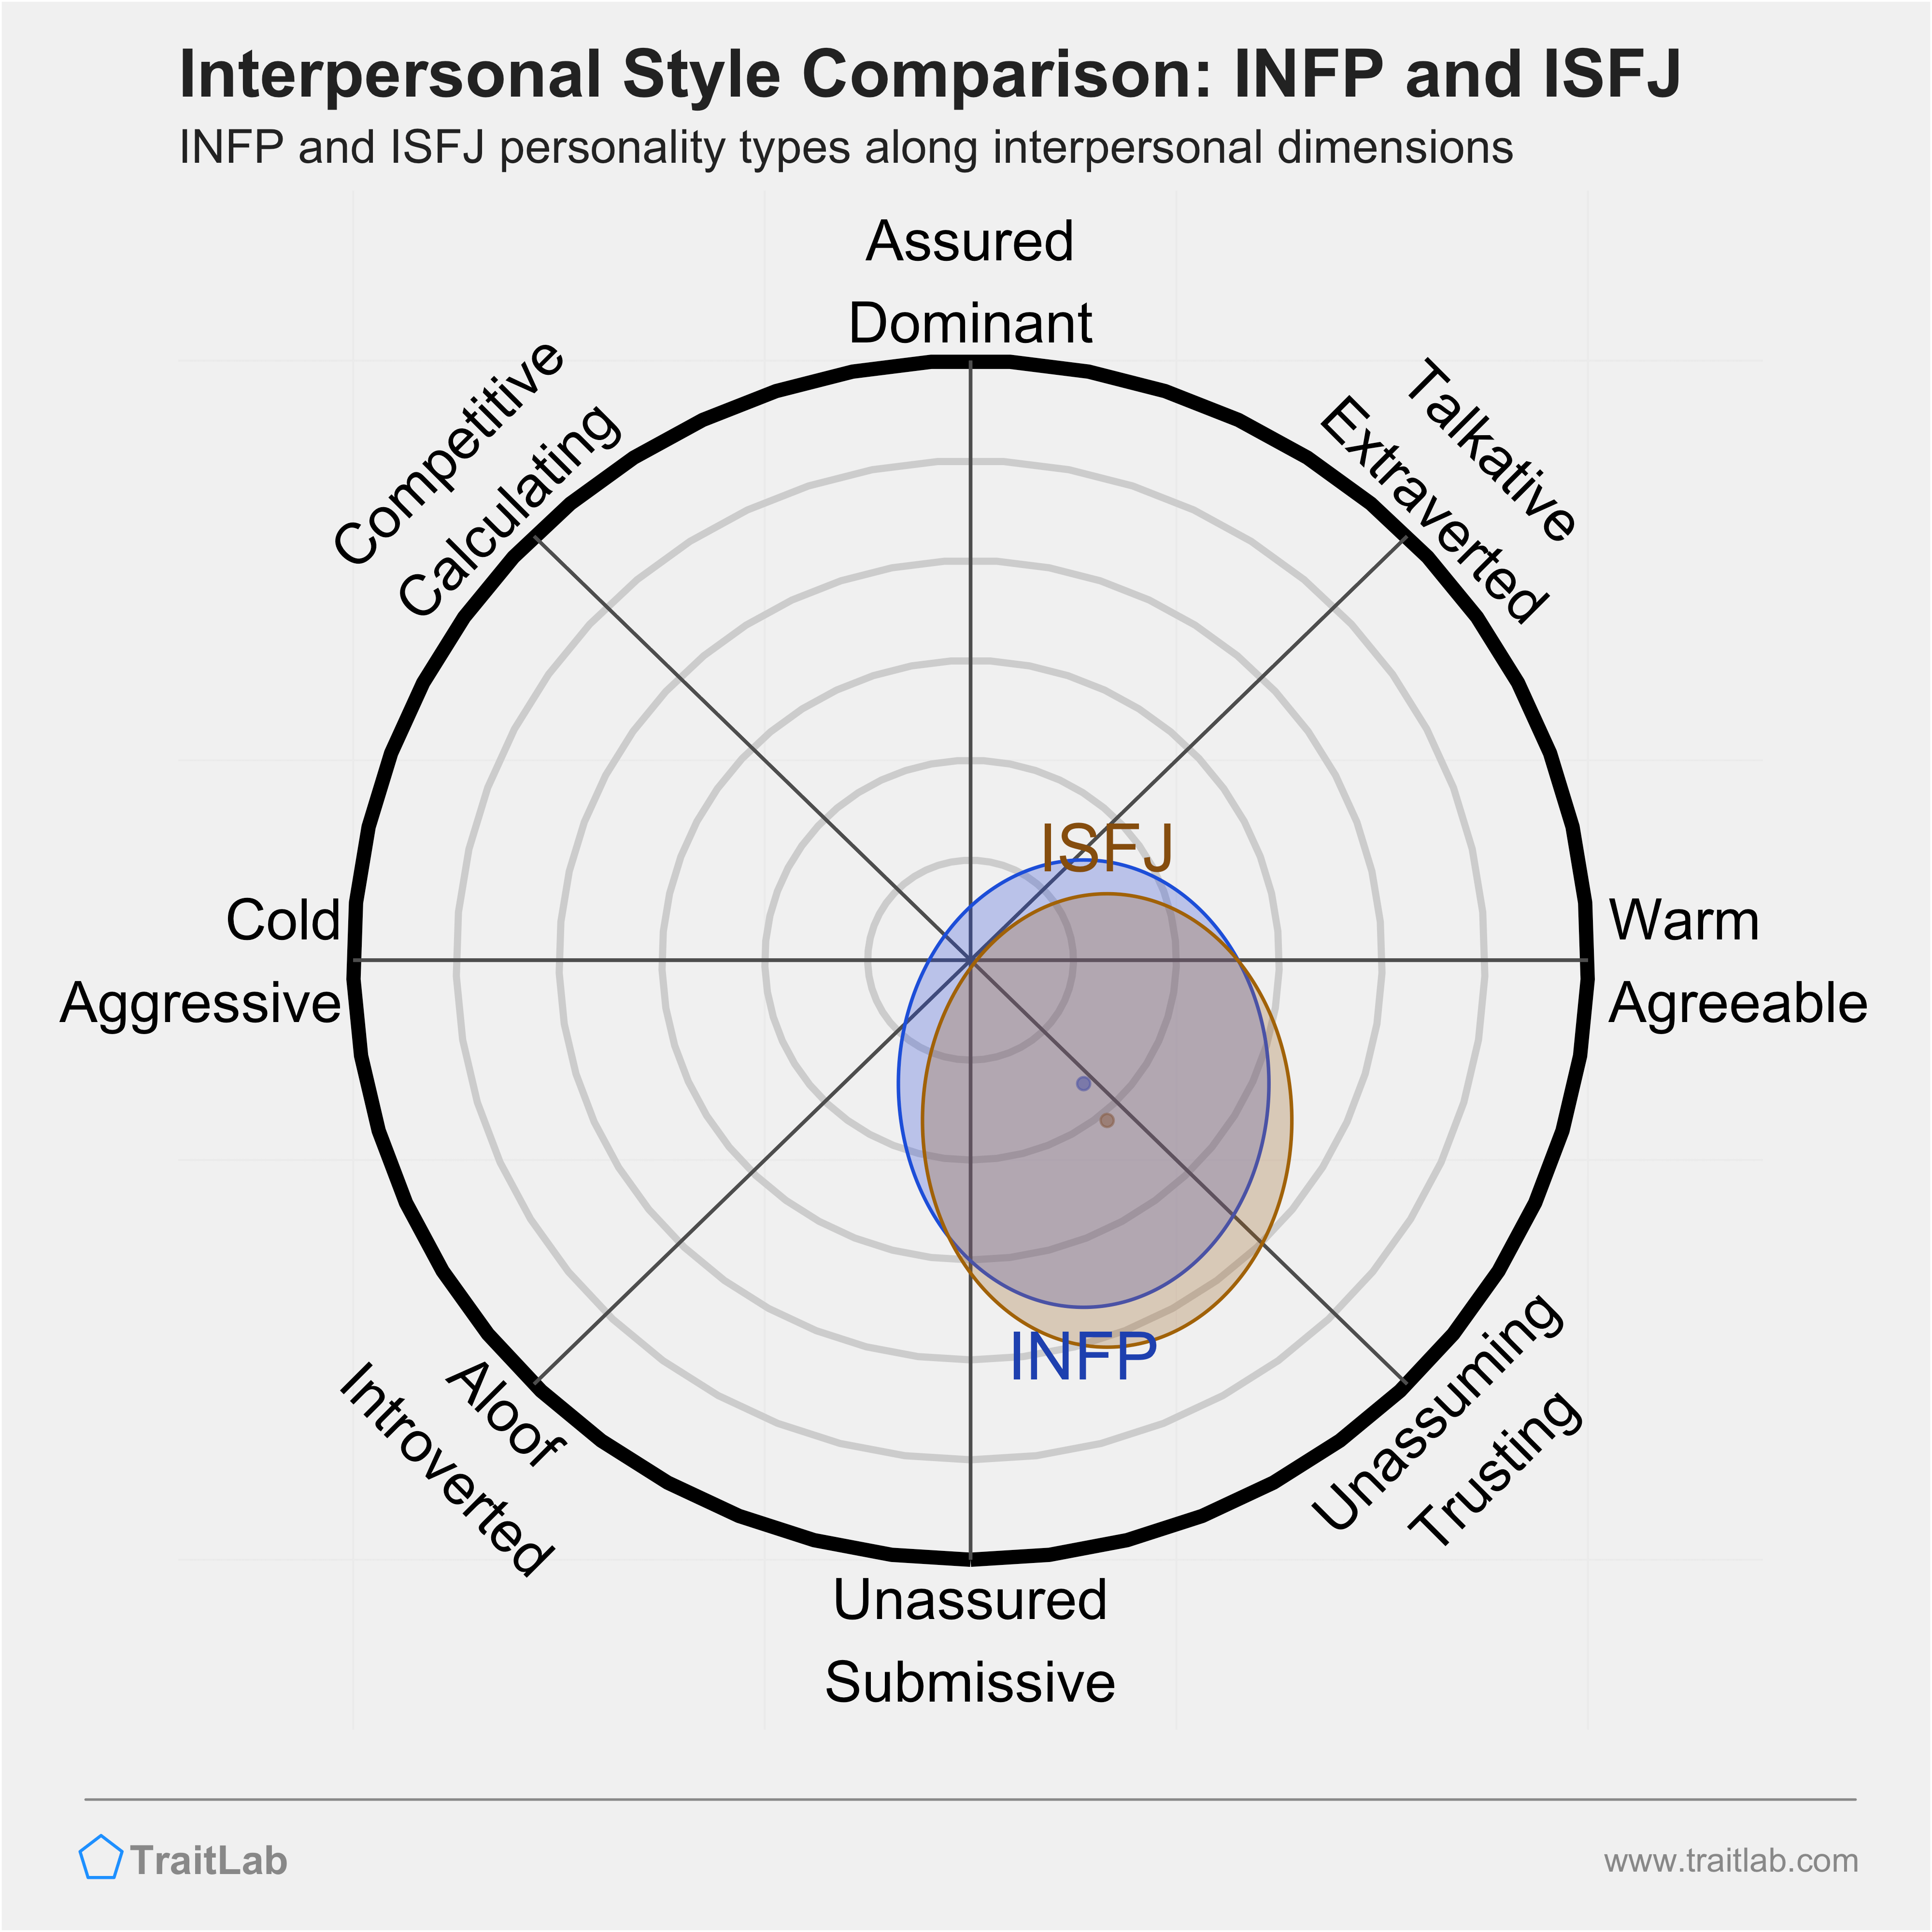 INFP and ISFJ comparison across interpersonal dimensions